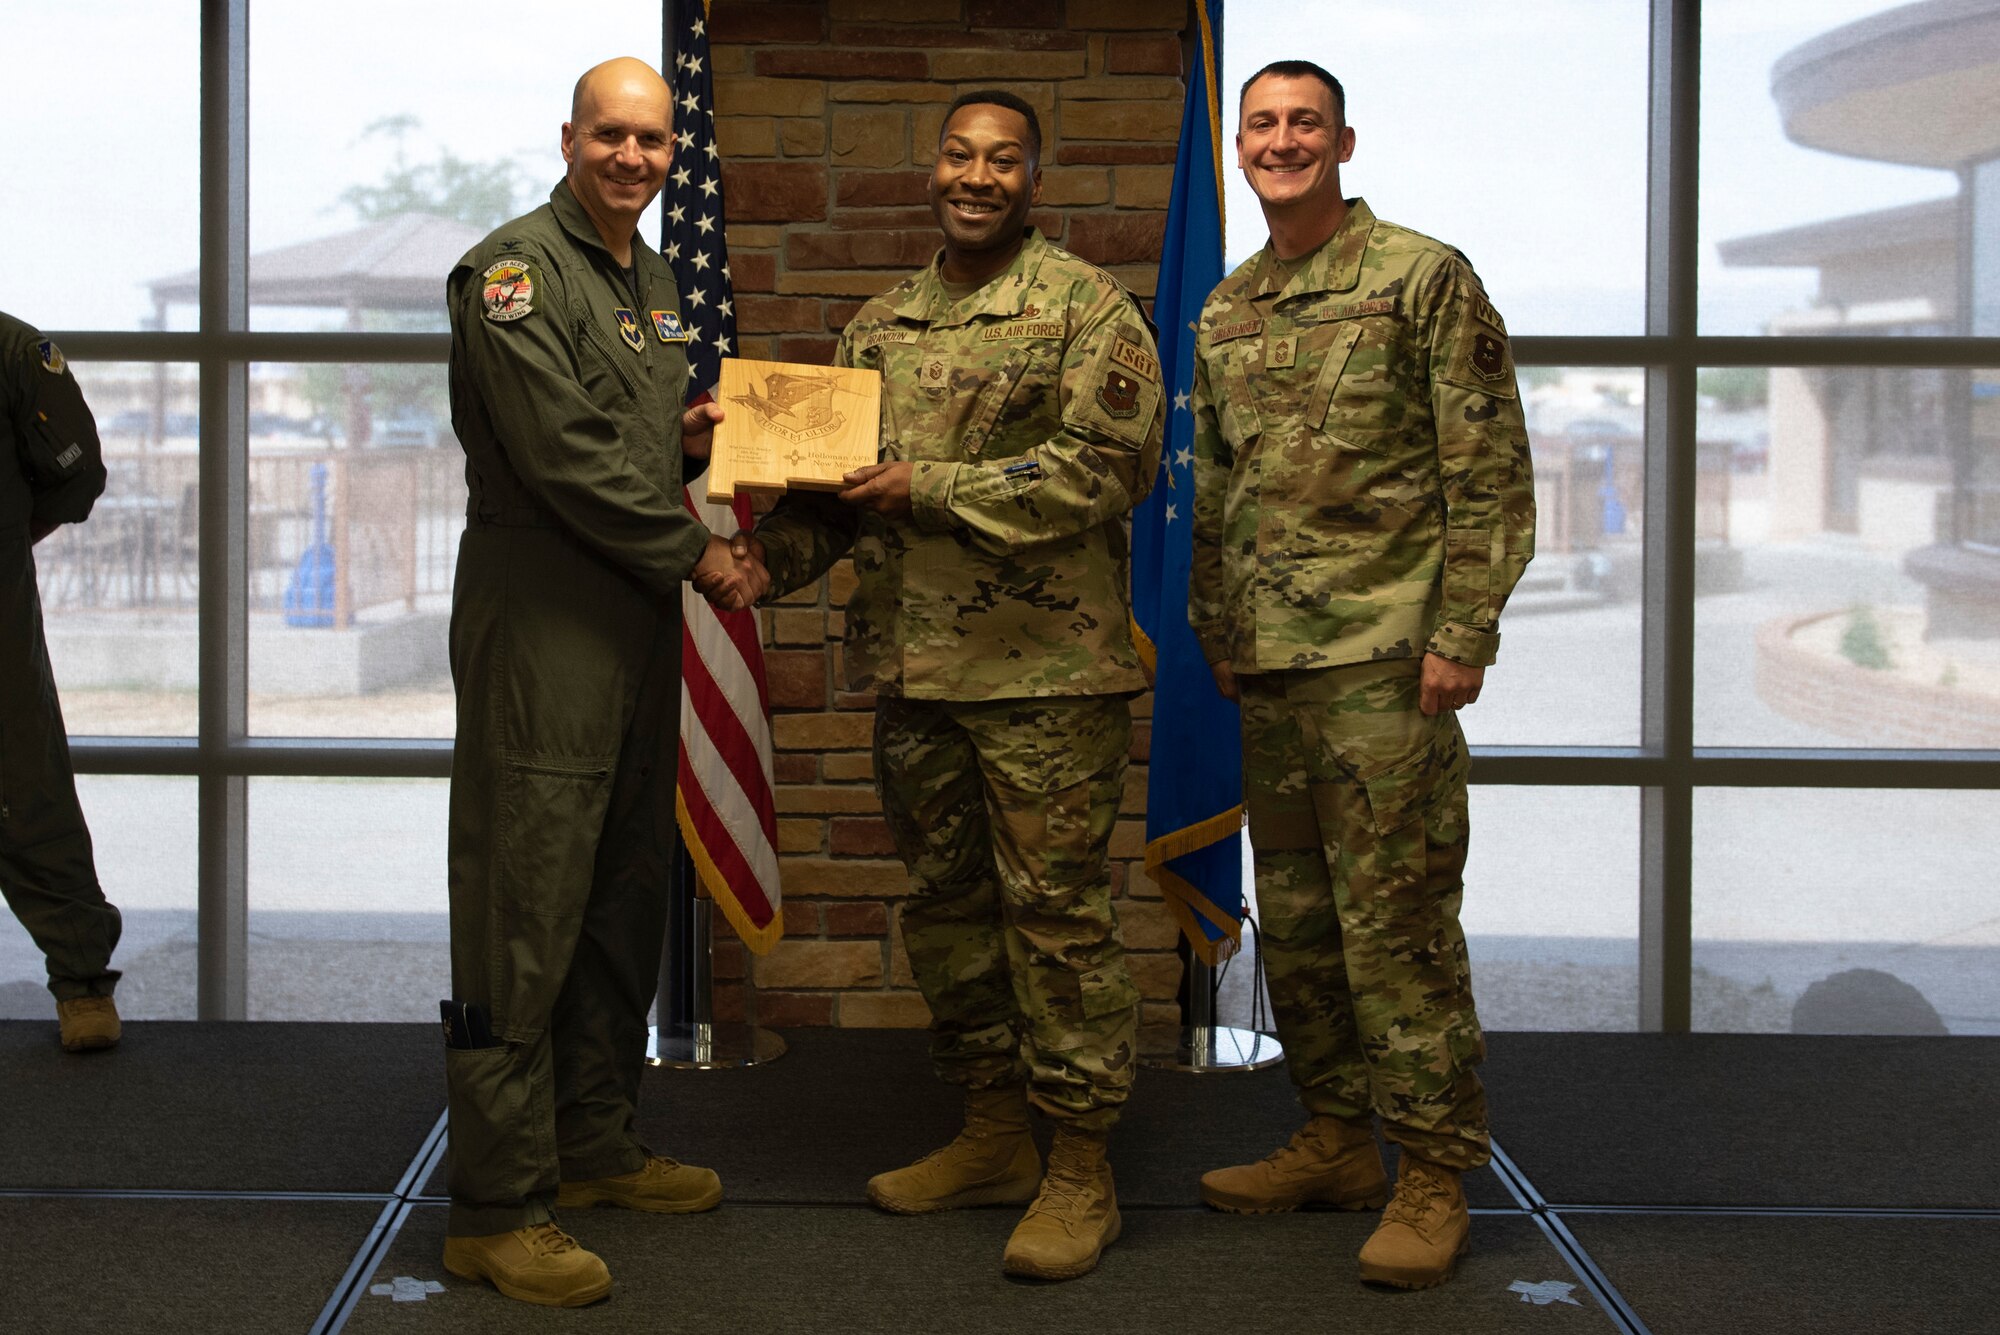 Master Sgt. Daniel Brandon, from the 49th Civil Engineer Squadron, accepts the First Sergeant of the Quarter Award during the 49th Wing’s 1st quarter awards ceremony, June 10, 2022, on Holloman Air Force Base, New Mexico.